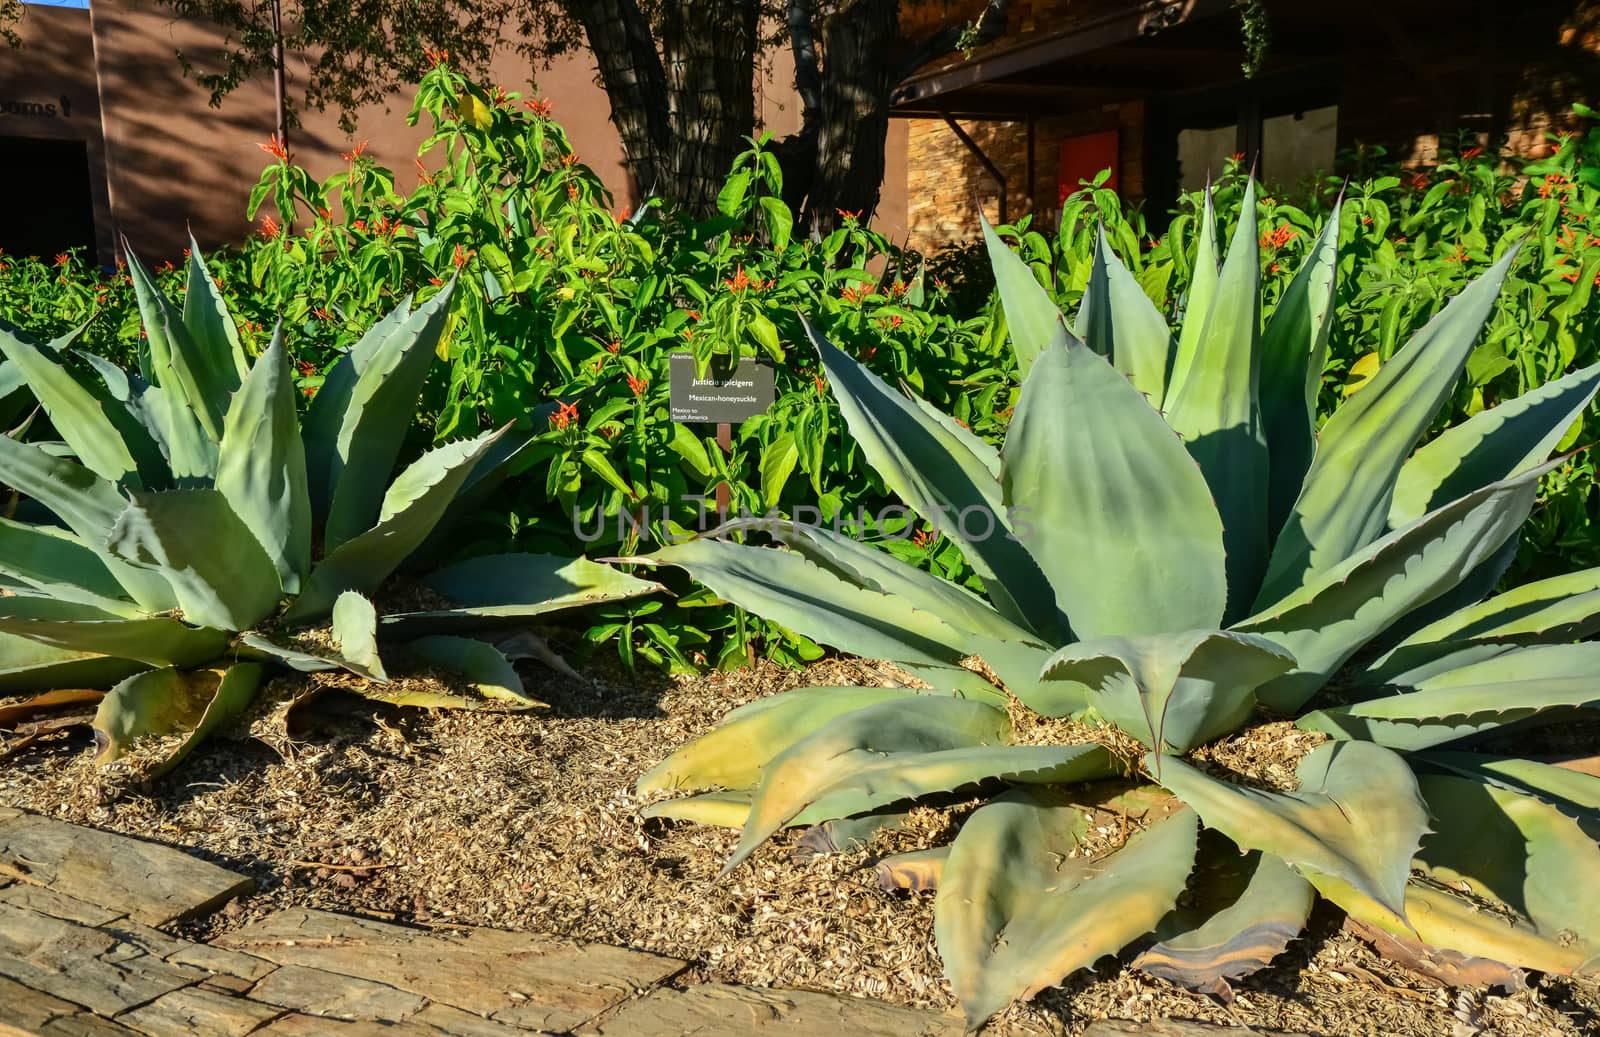 A group of succulent plants Agave and Opuntia cacti by Hydrobiolog